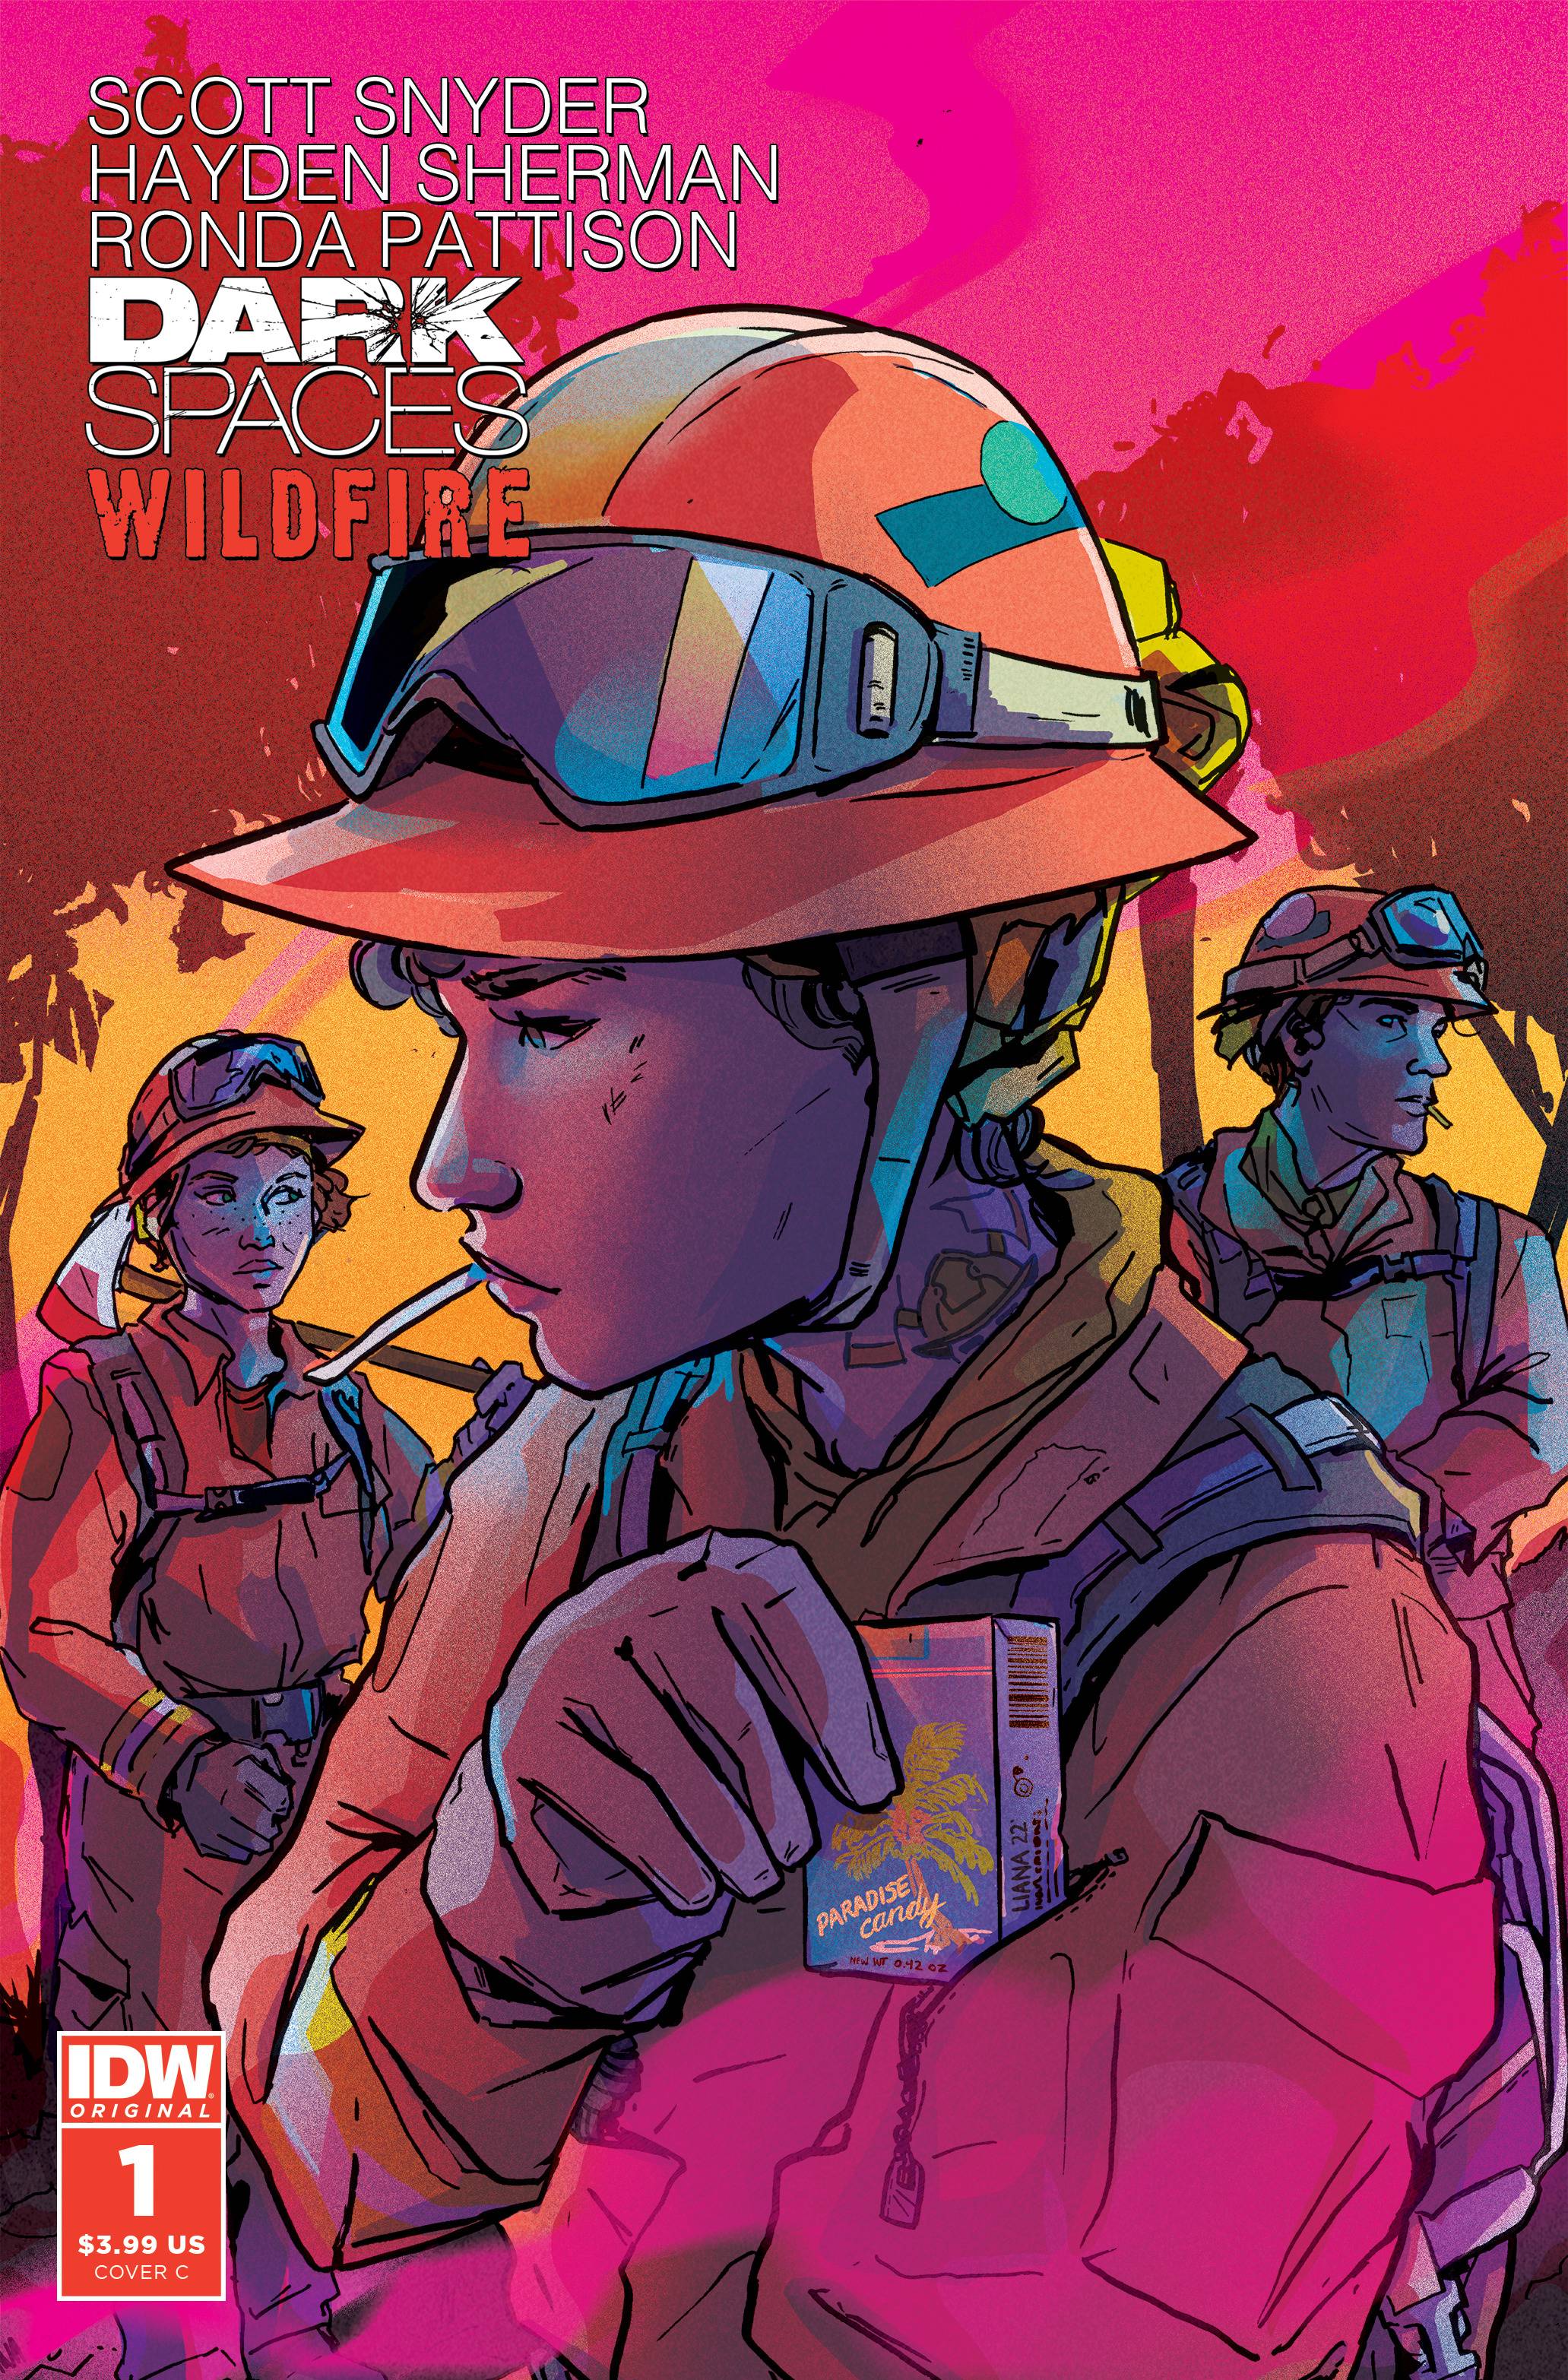 Cover of Dark Spaces Wildfire, featuring firefighters